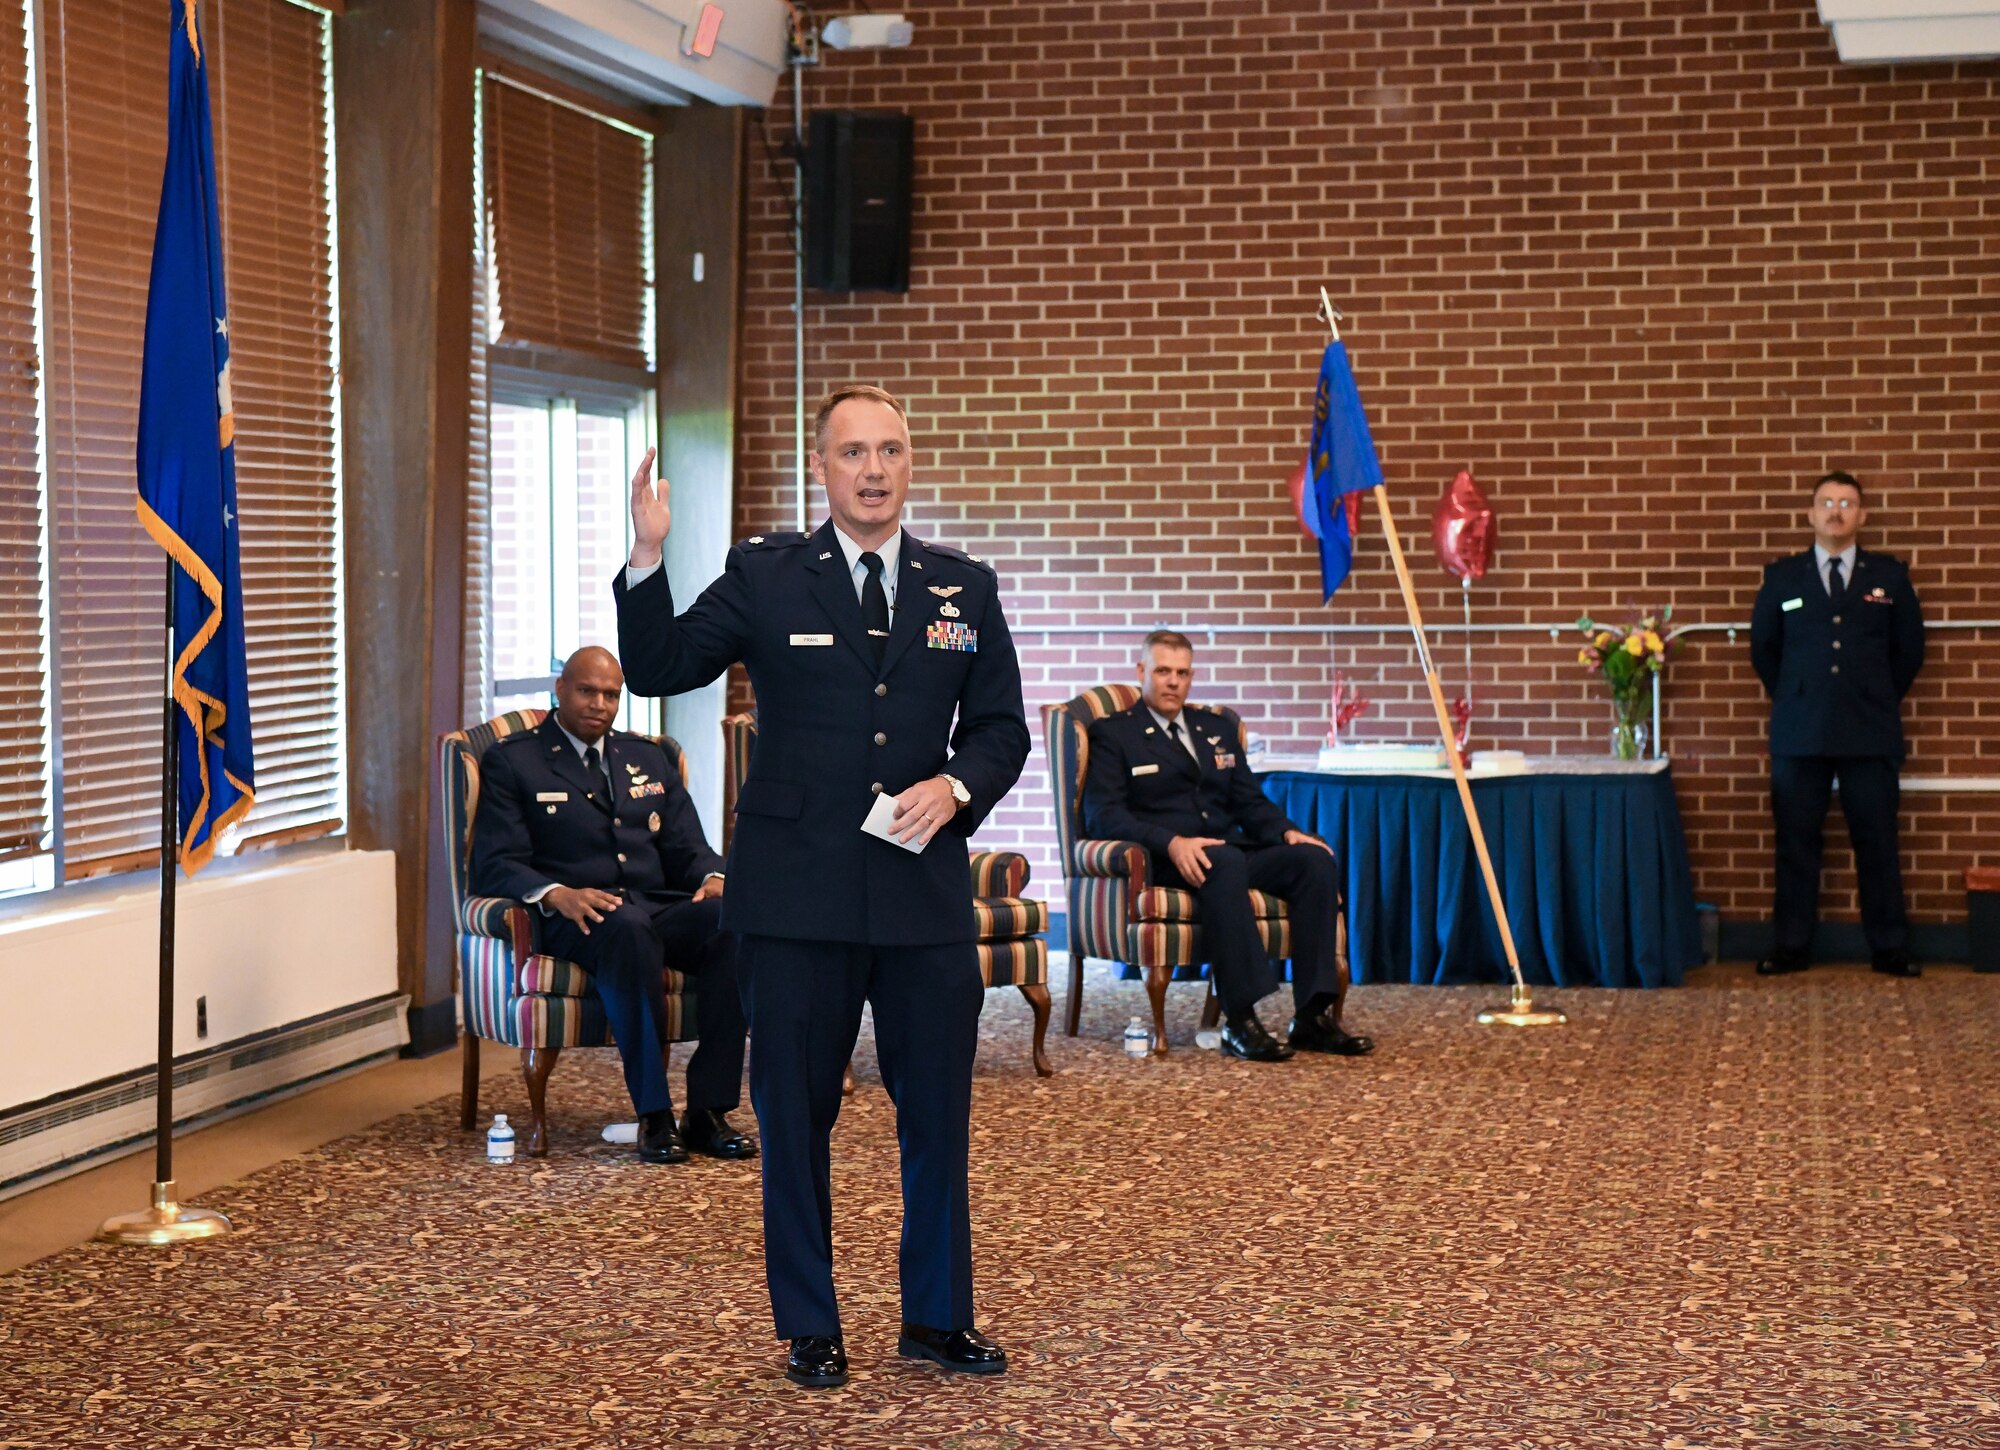 Lt. Col. Dayvid Prahl, new Arnold Engineering Development Complex Space Test Branch chief, addresses those in attendance during a Change of Leadership ceremony June 24, 2021, at Arnold Lakeside Complex at Arnold Air Force Base, Tenn. (U.S. Air Force photo by Jill Pickett)